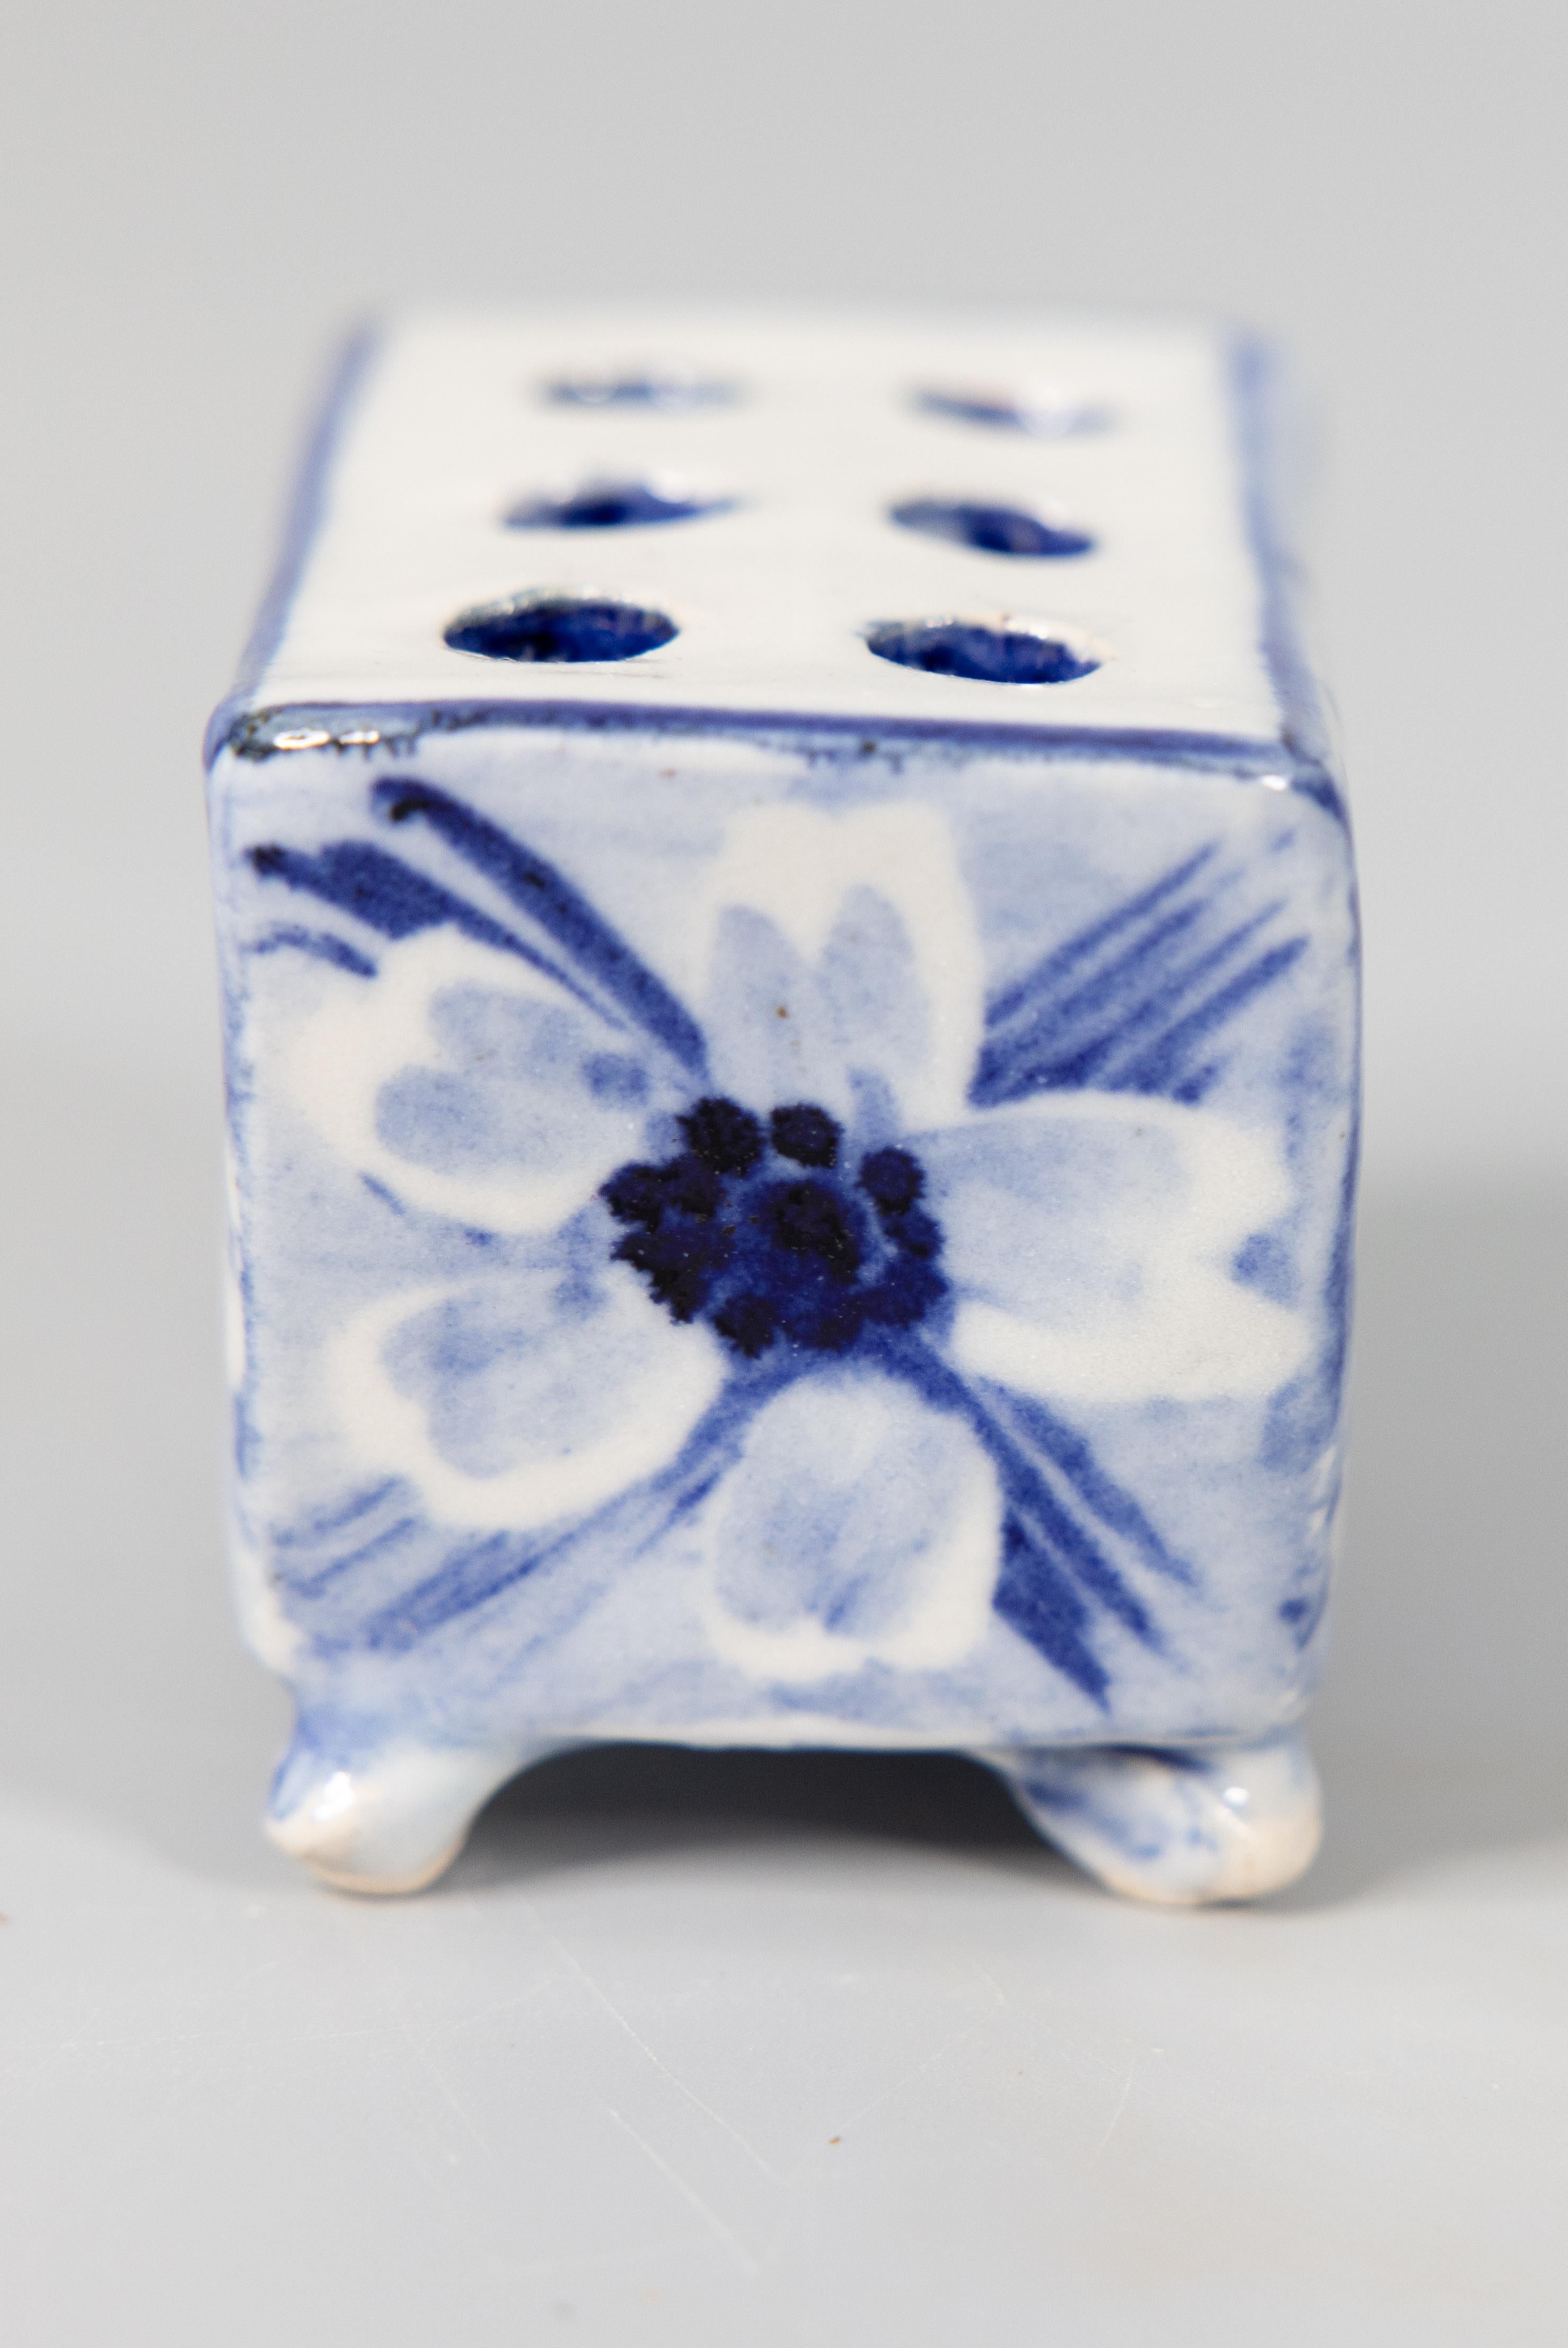 A fine antique Dutch Delft faience hand molded flower brick or flower frog vase. This charming footed flower pot has a hand painted floral design in the traditional Delft colors of cobalt blue and white. It would be lovely with your favorite flowers